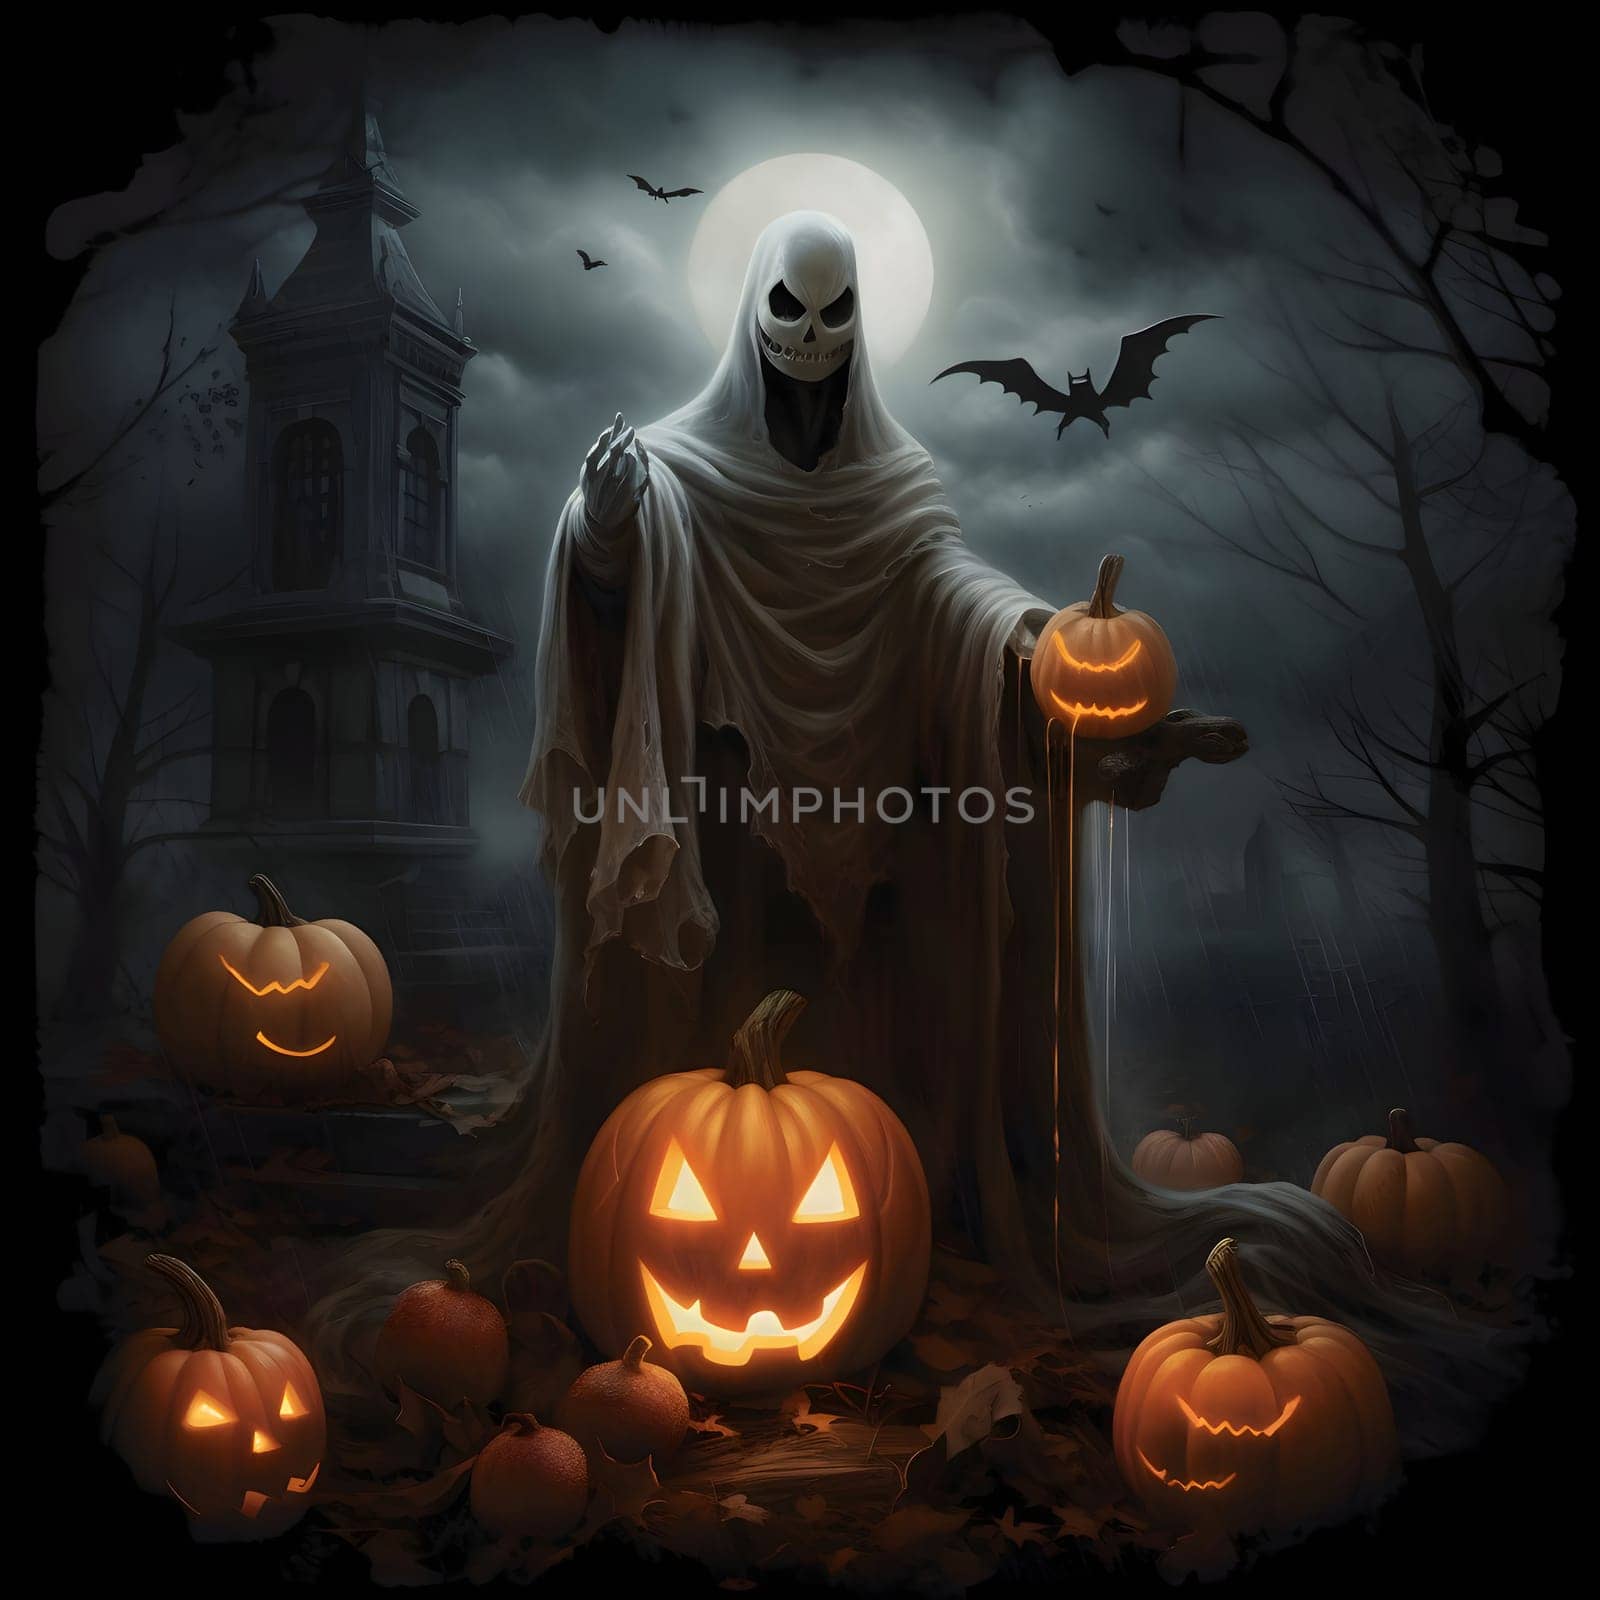 Monster, death holding pumpkins, all around glowing jack-o-lanterns, church tower in the background, midnight, flying bats and fog, a Halloween image. by ThemesS